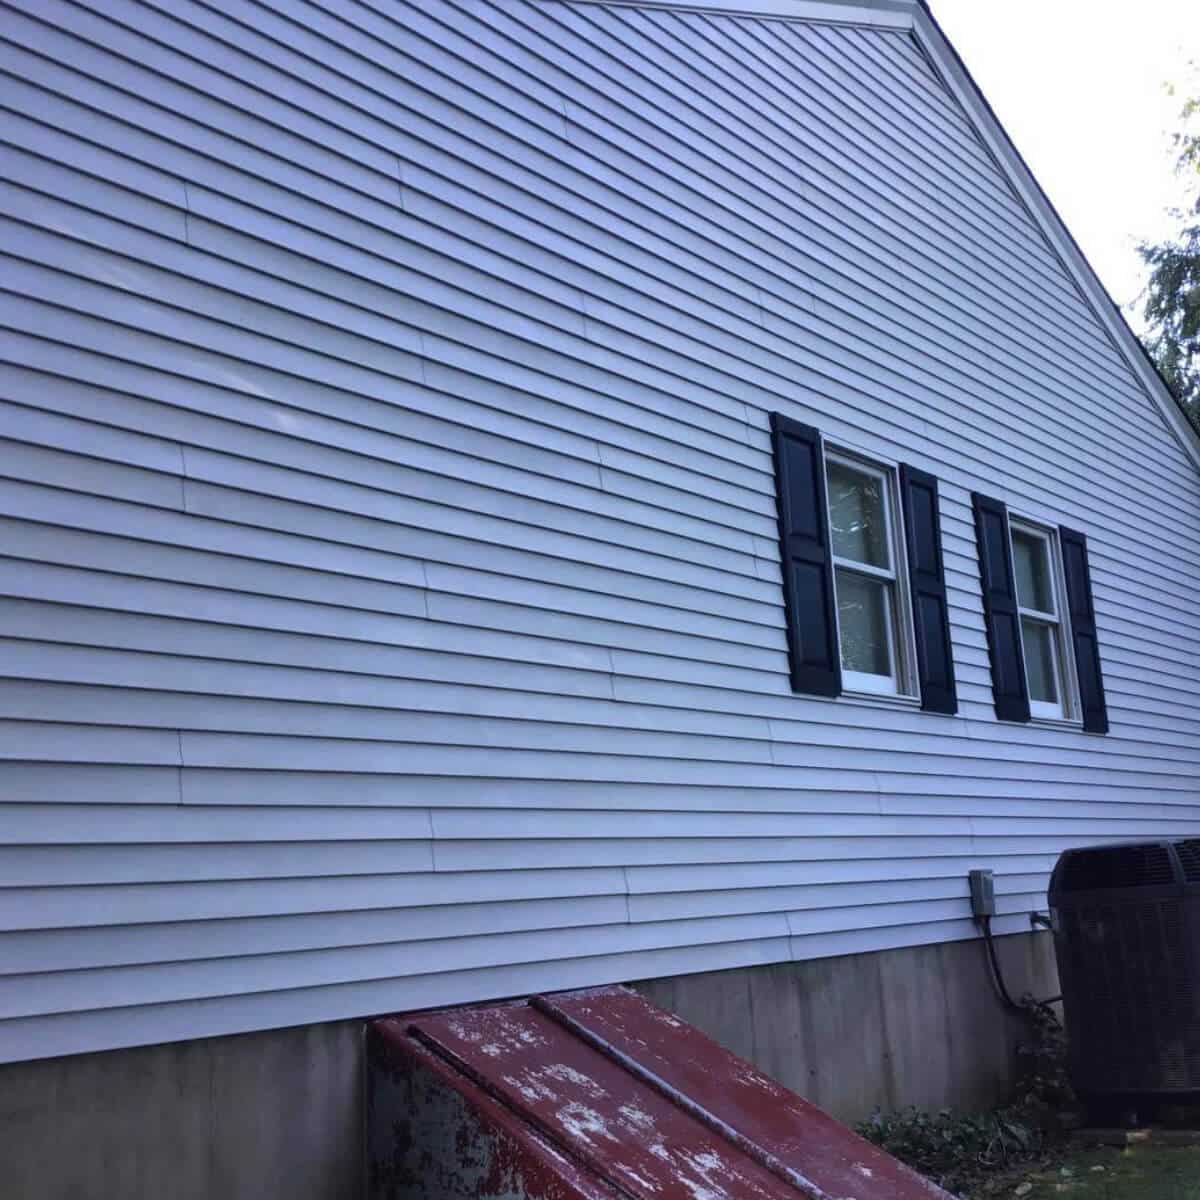 clean house siding after professional house washing in lansdale pa